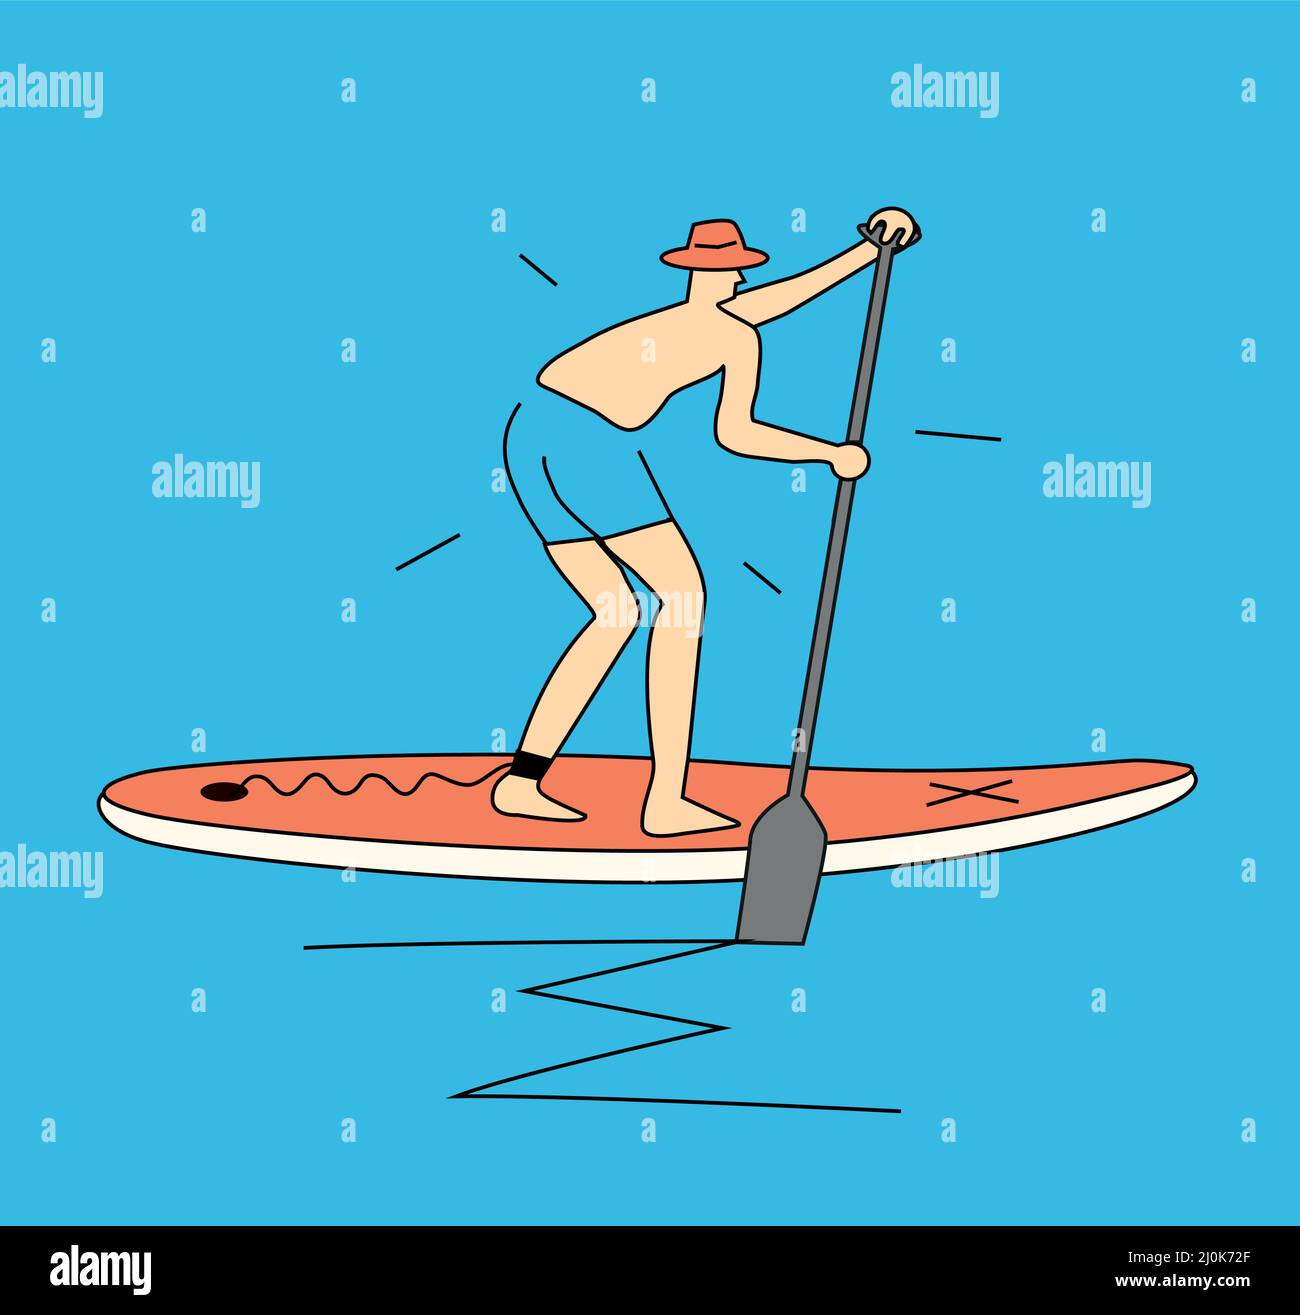 Funny beginner on paddleboard, cartoon. Stylized simple illustration of funny scared man with hat riding on a paddleboard. T-shirt design. Vector ava Stock Vector